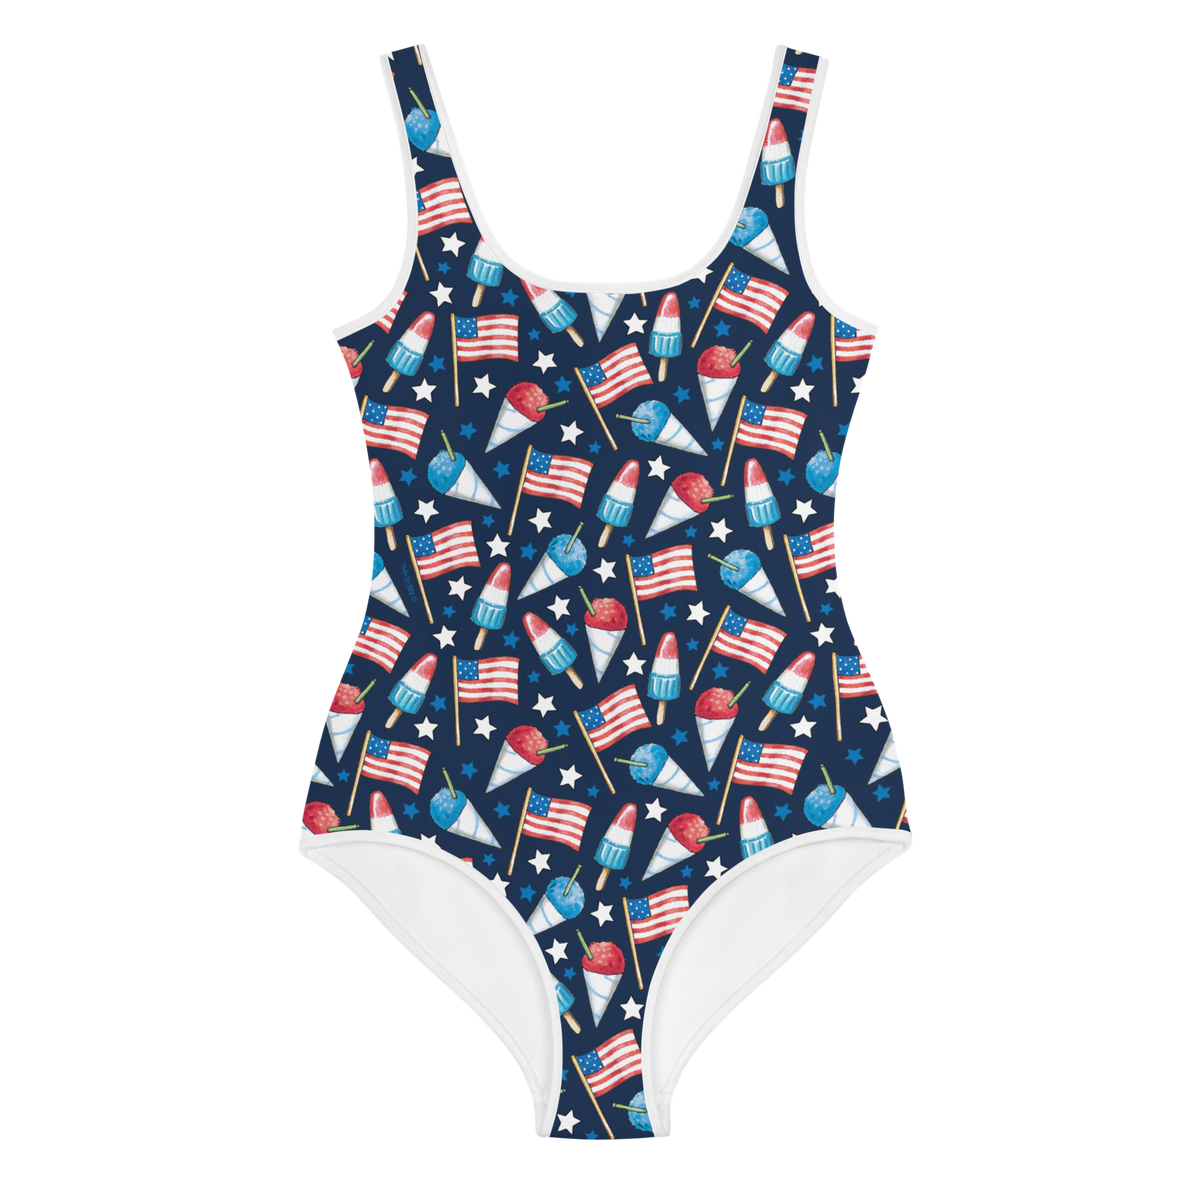 Snowcone Summer Youth Swimsuit